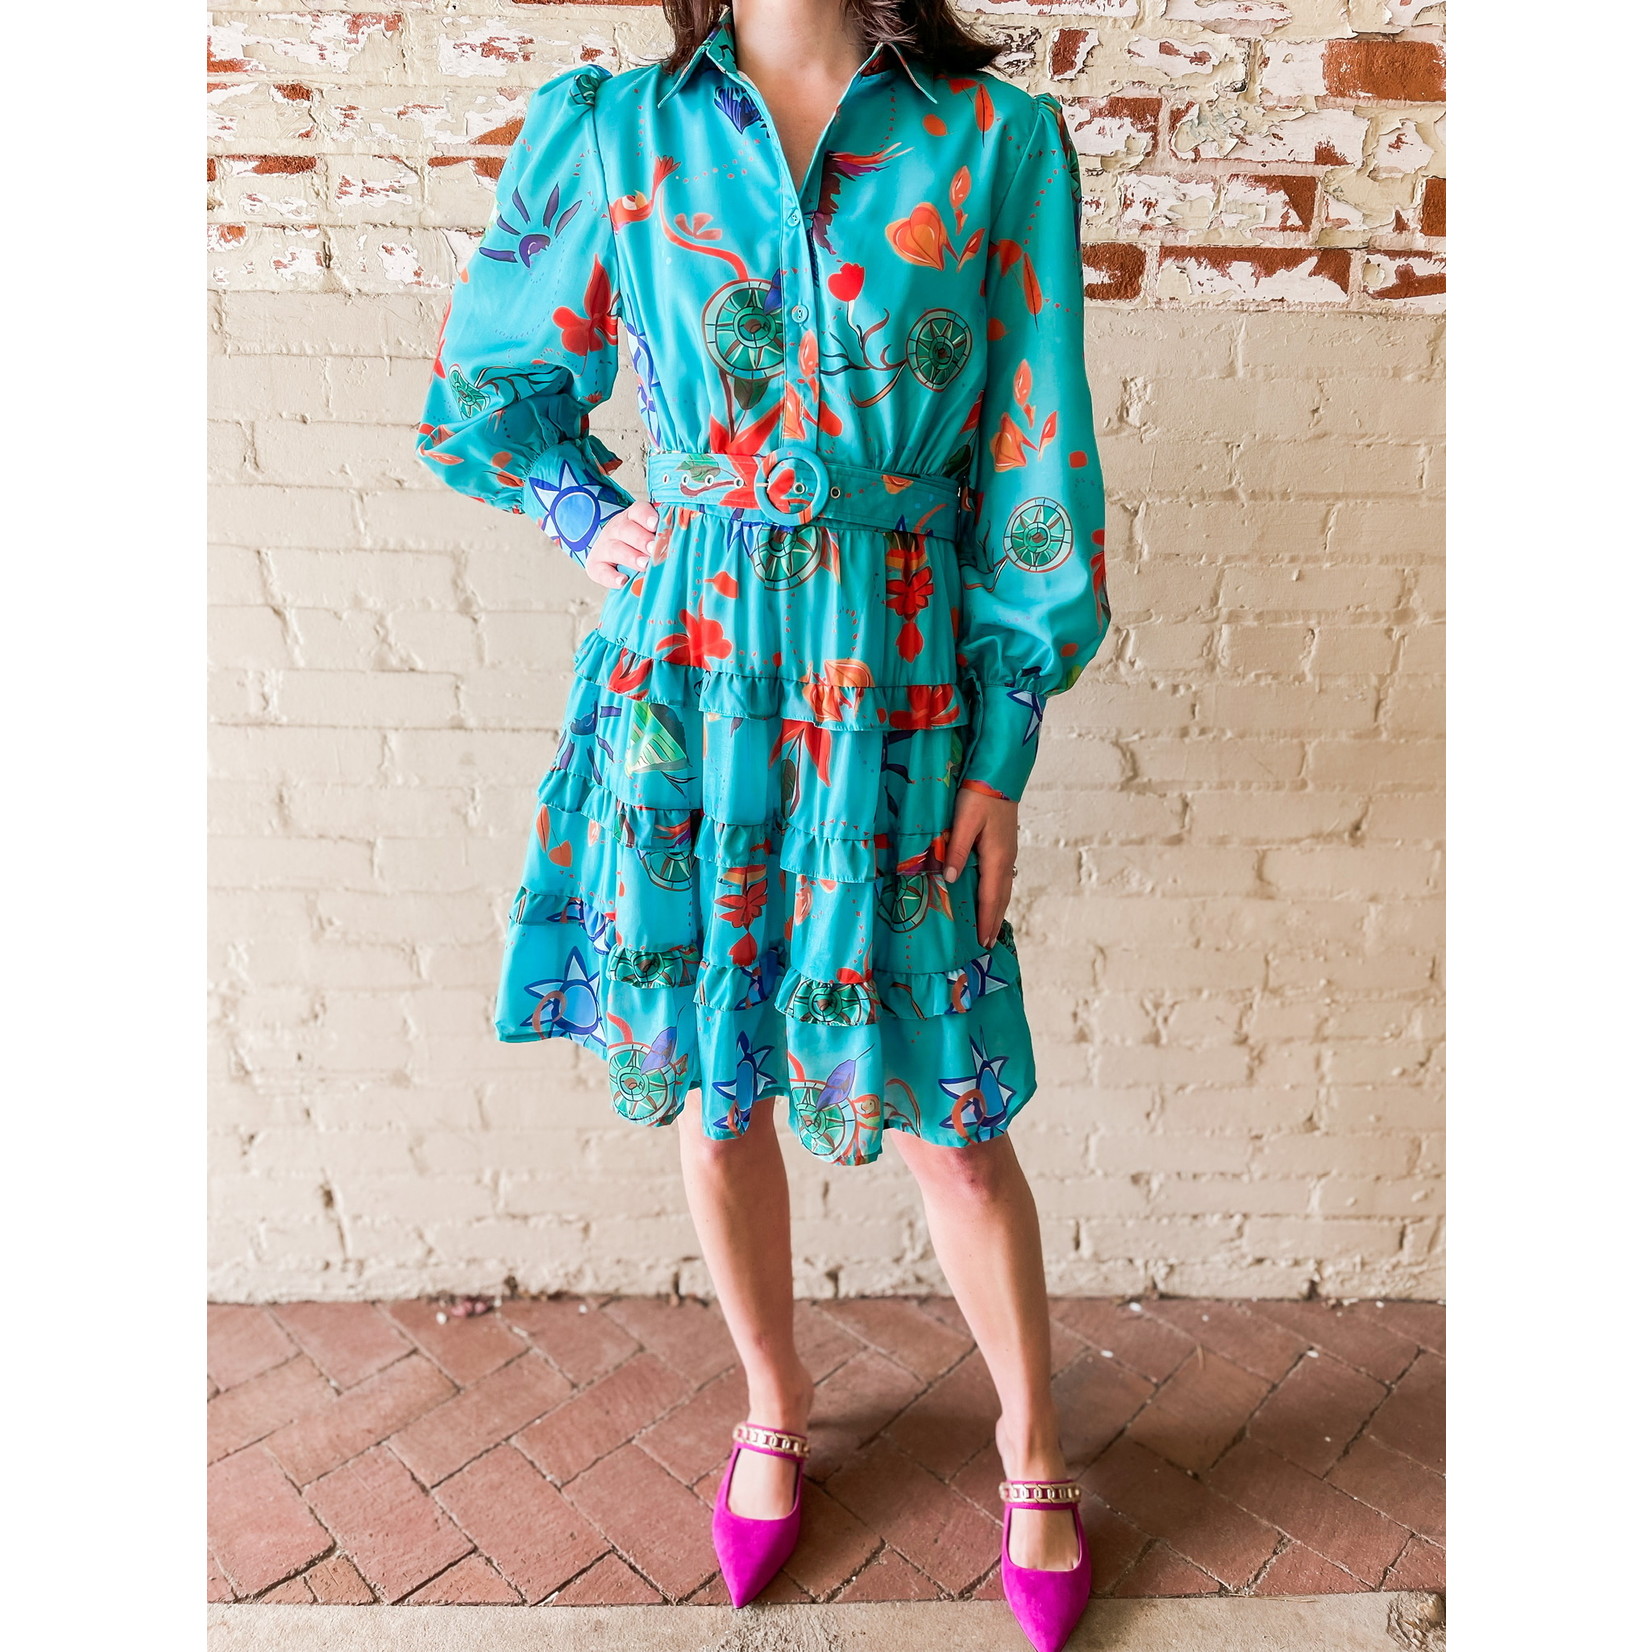 The Fashion Belted Button Up Dress